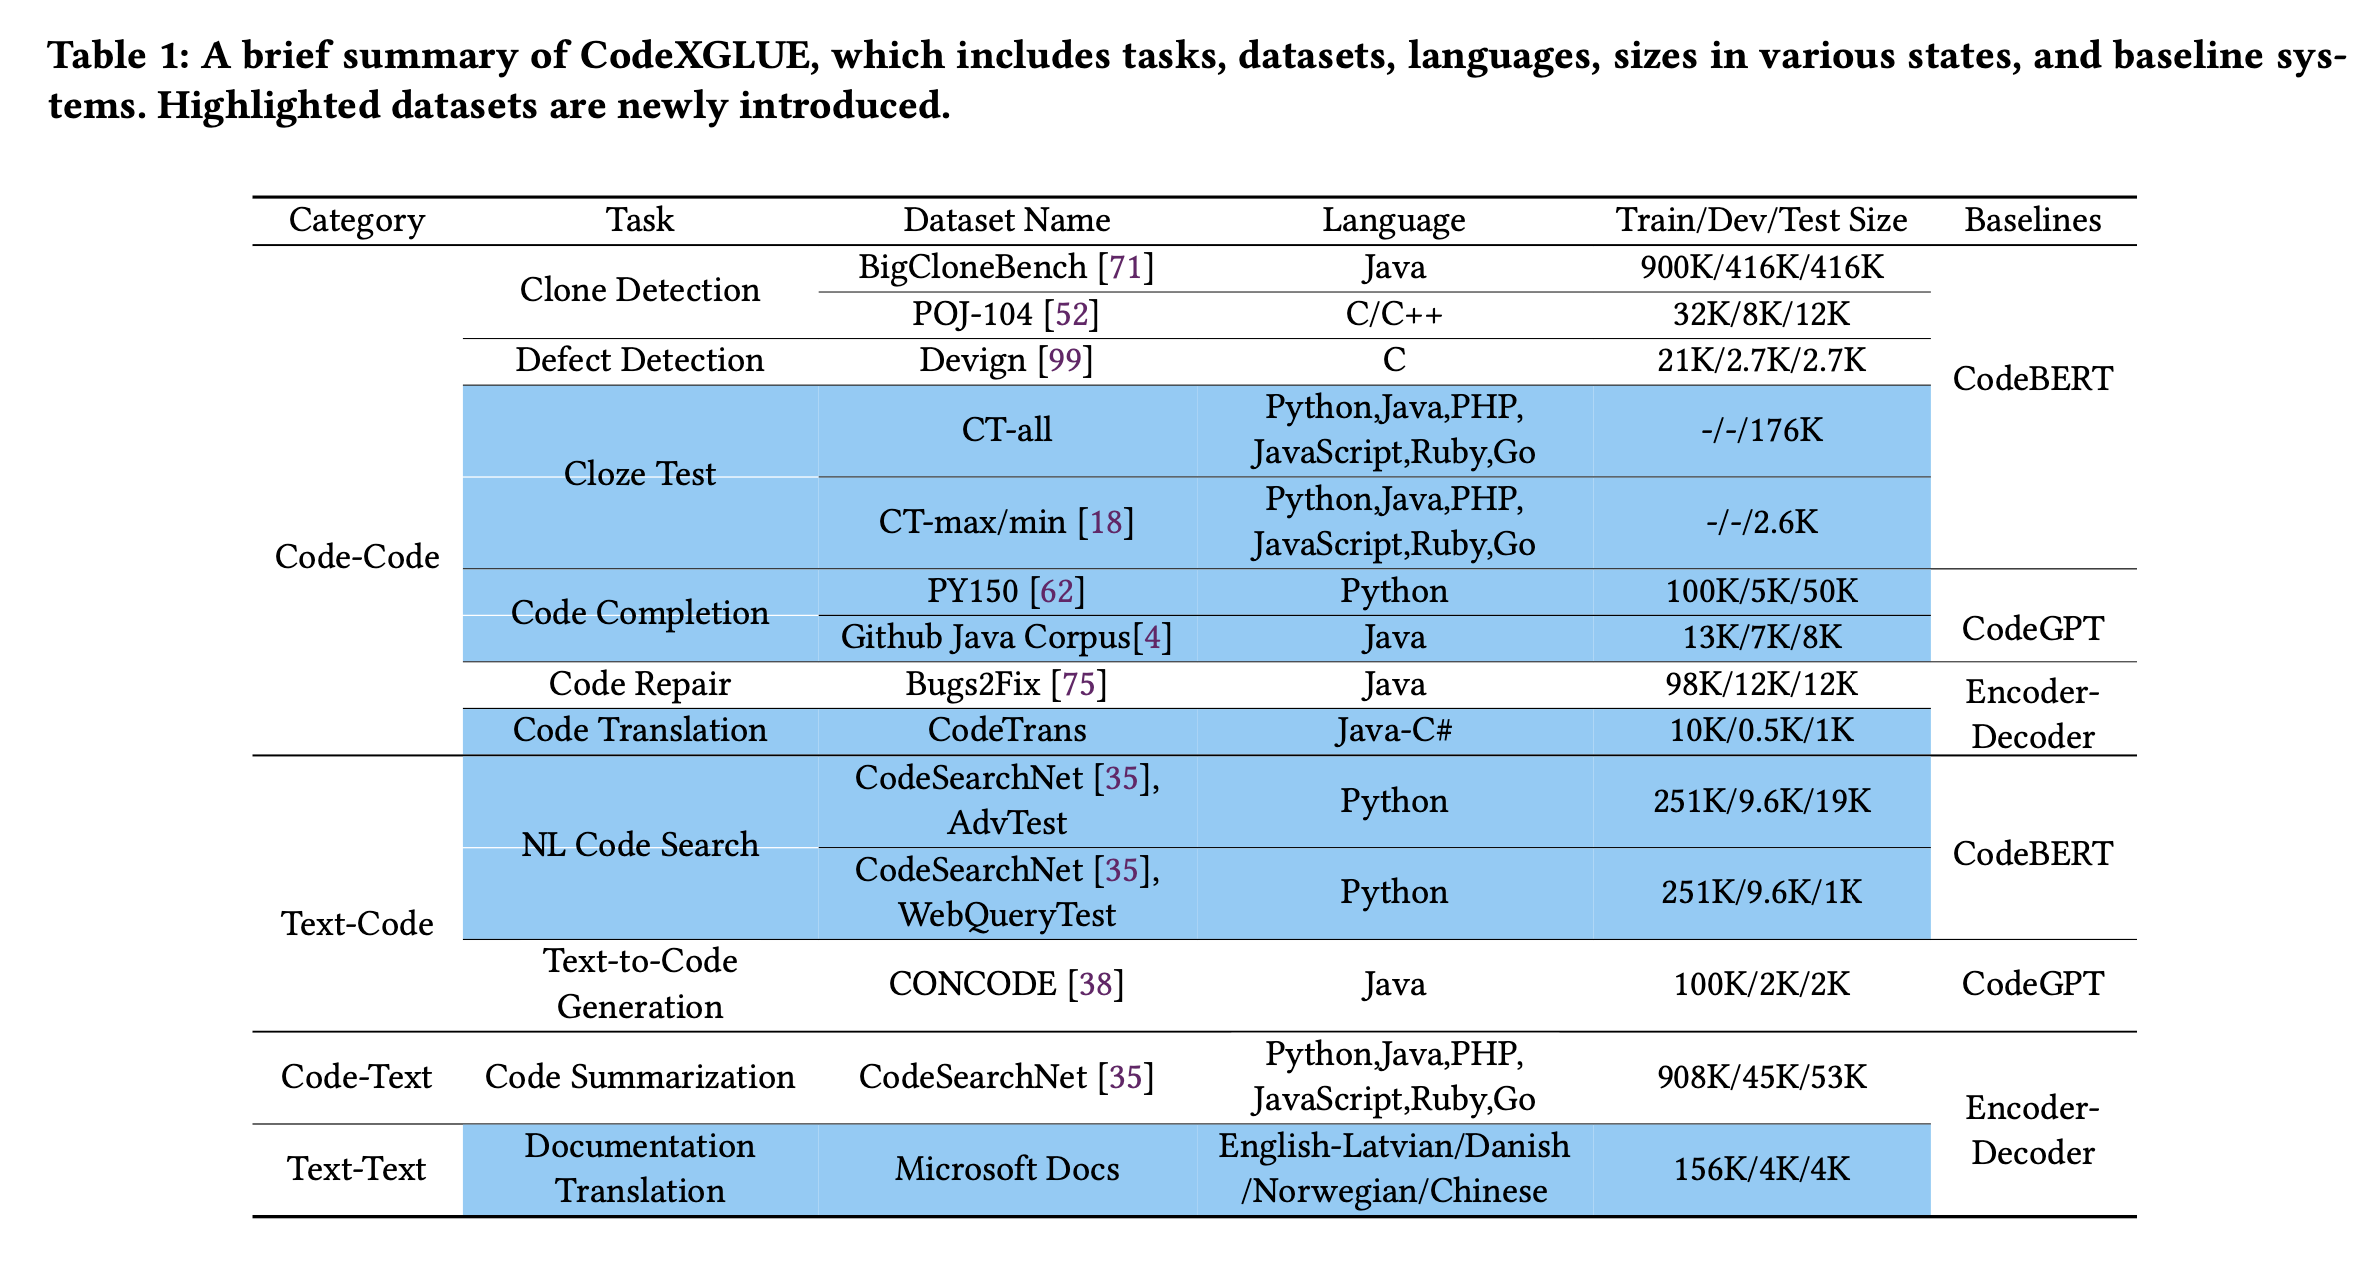 A brief summary of CodeXGLUE, which includes tasks, datasets, languages and baselines.